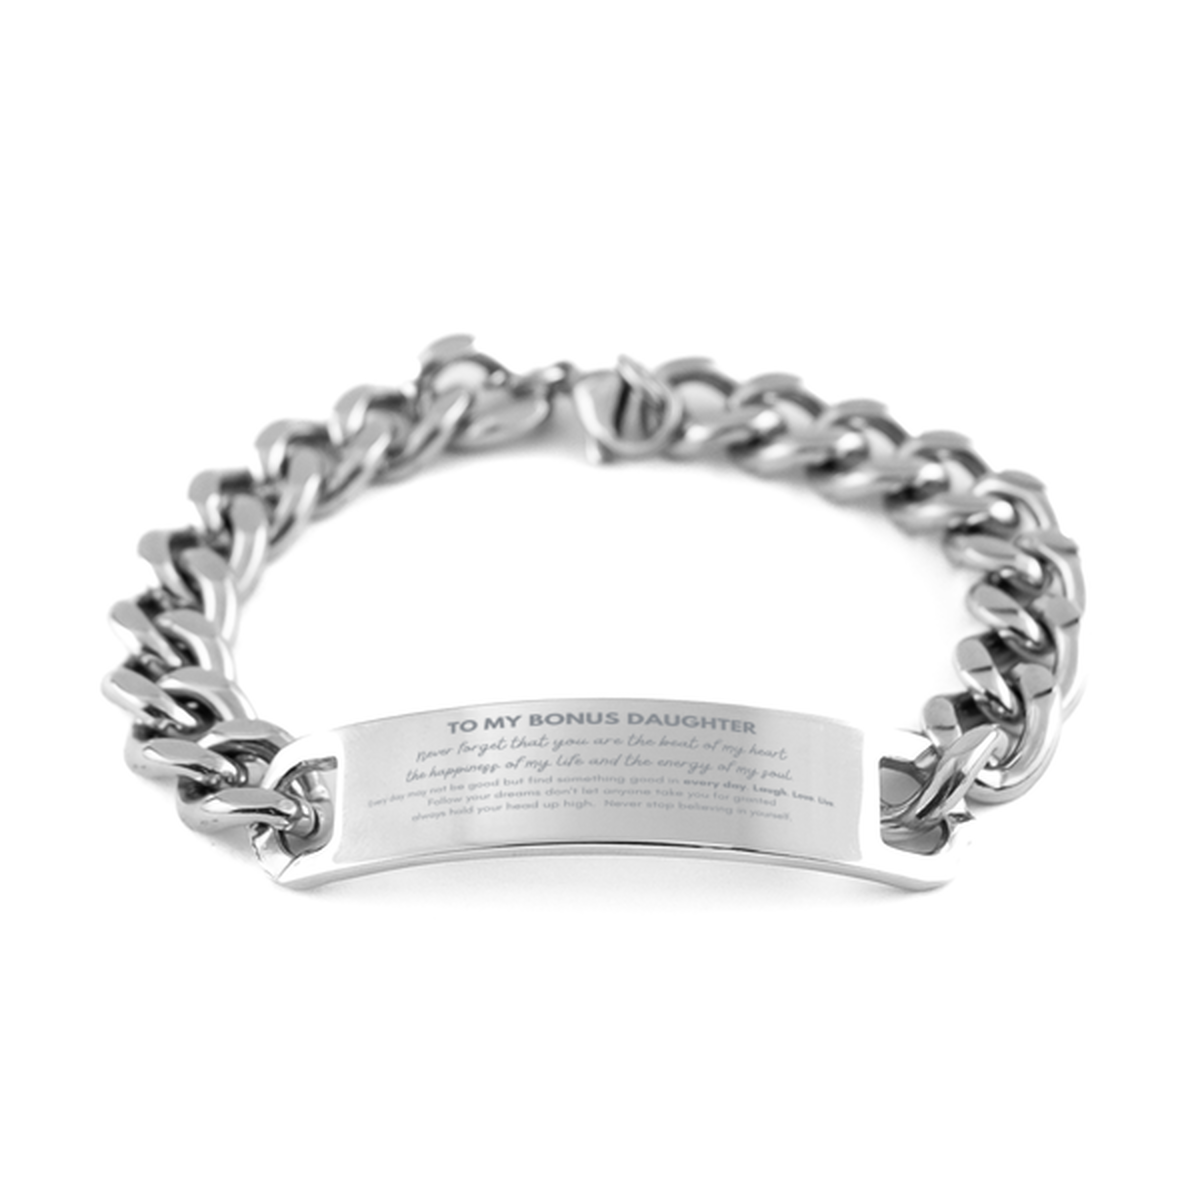 To My Bonus Daughter Bracelet Gifts, Christmas Bonus Daughter Cuban Chain Stainless Steel Bracelet Present, Birthday Unique Motivational For Bonus Daughter, To My Bonus Daughter Never forget that you are the beat of my heart the happiness of my life and t